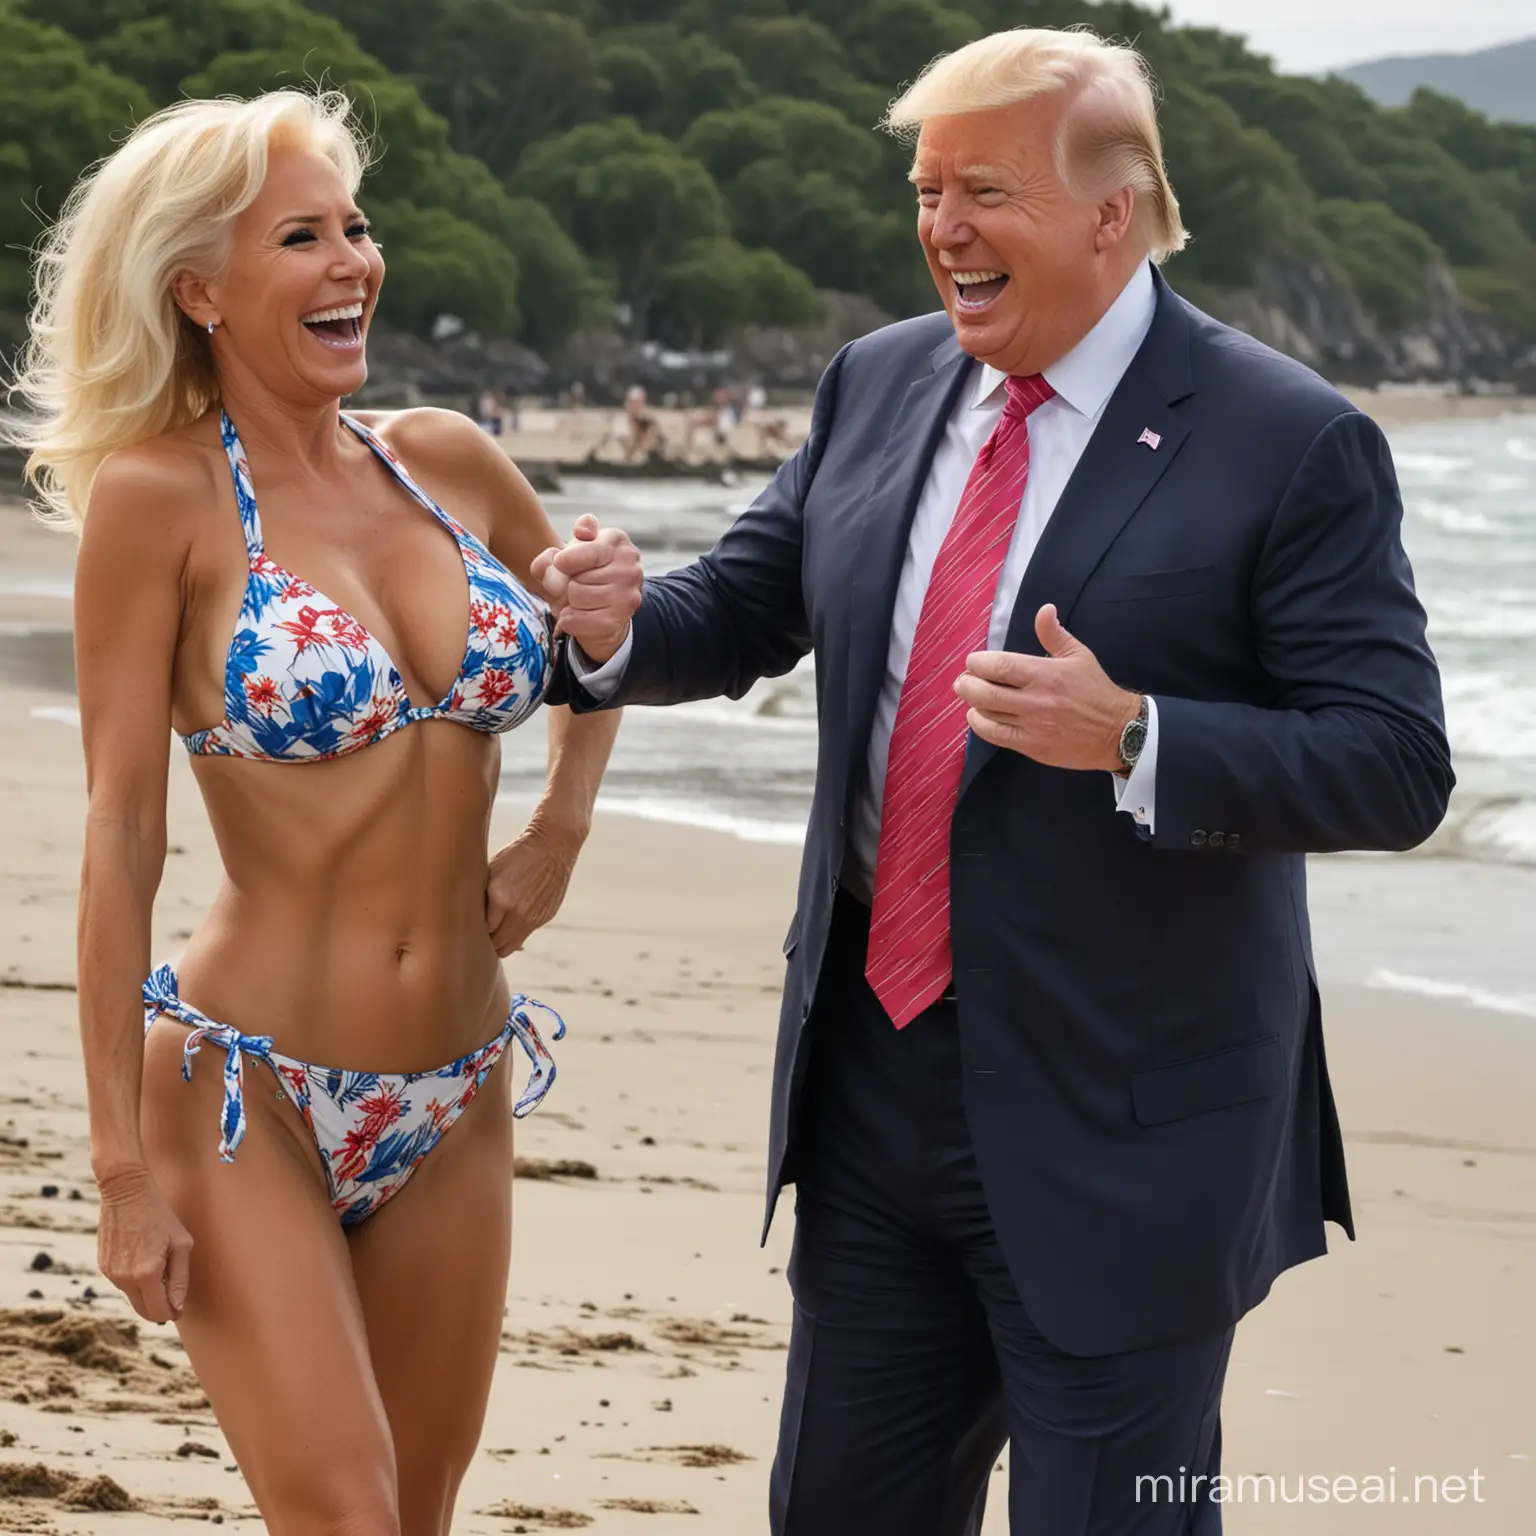 Donald Trump dancing dressed in a bikini and a laughing Biden looks at him